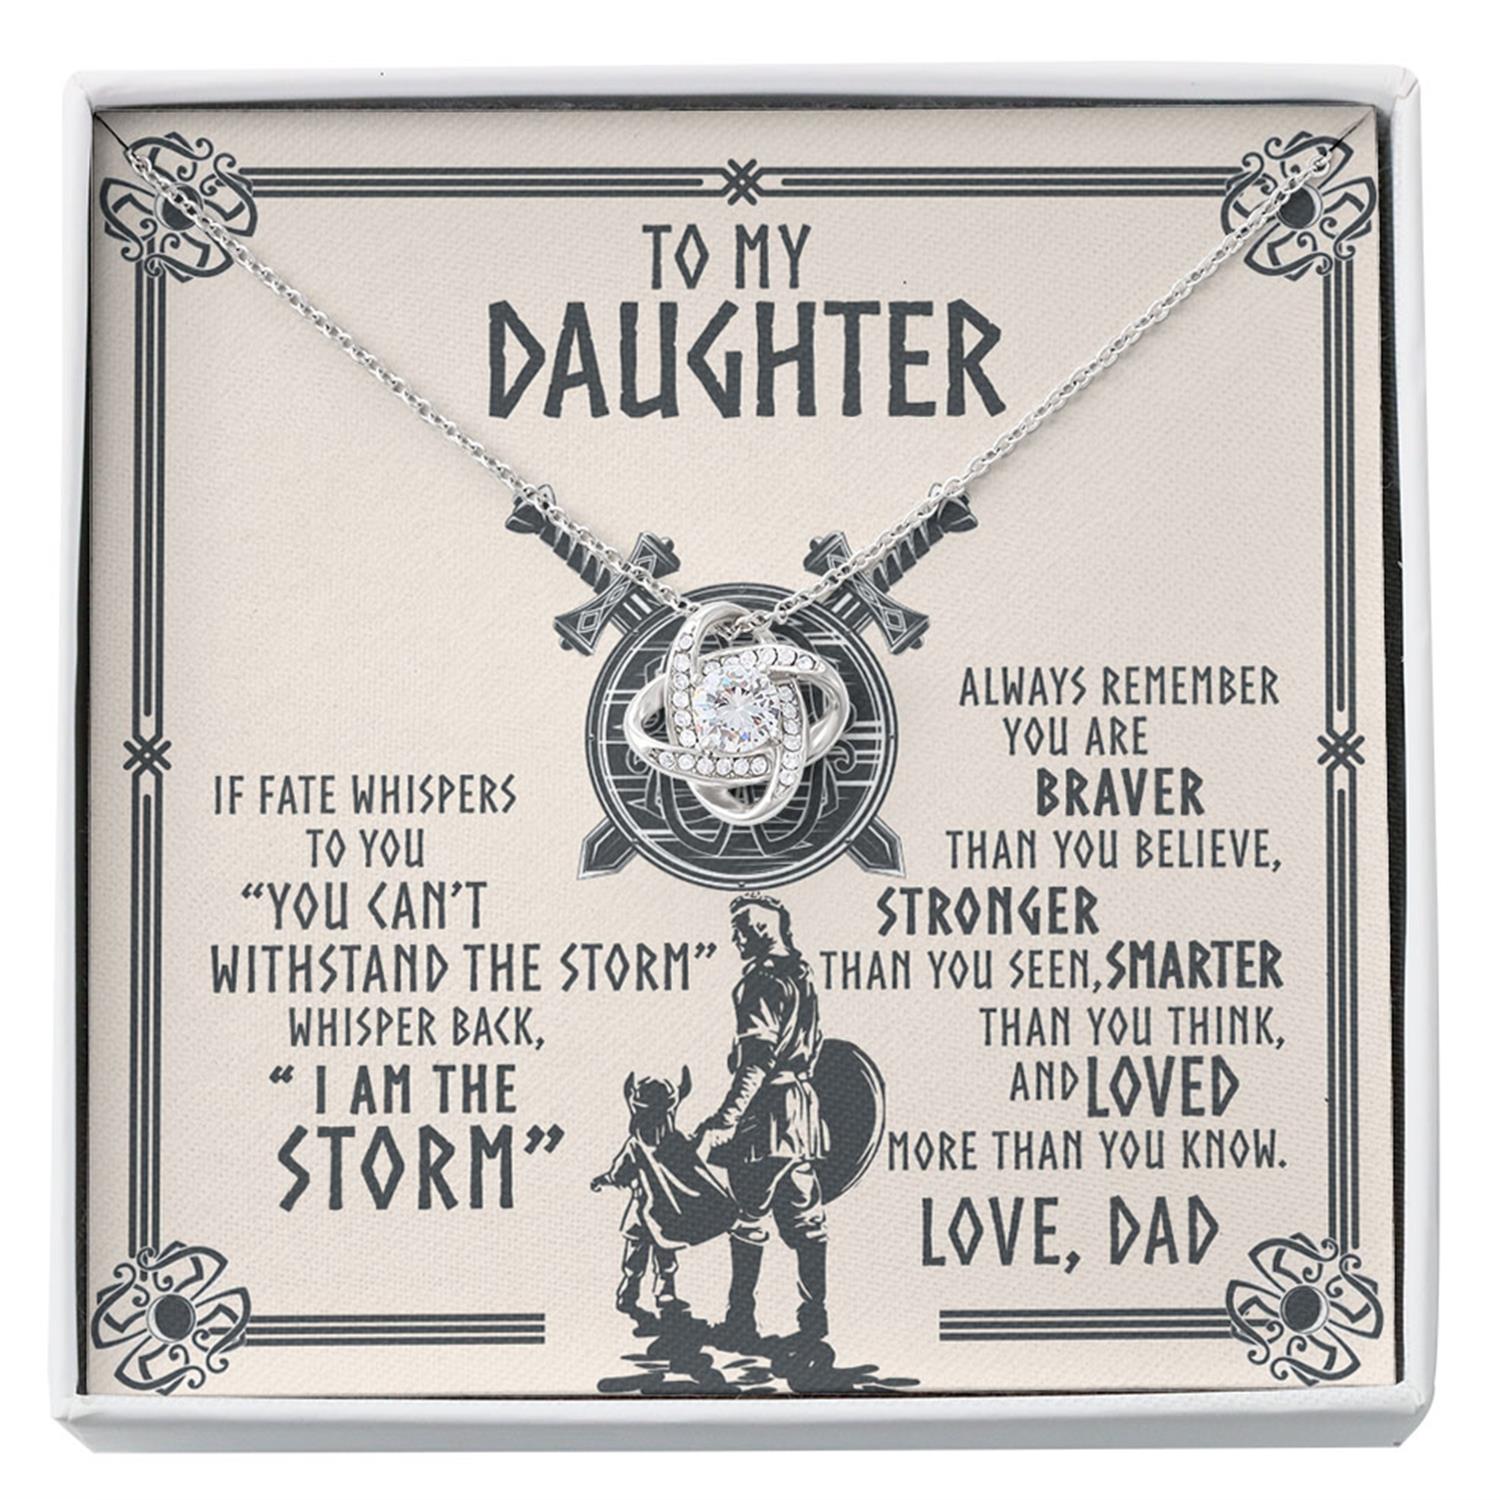 Daughter Necklace, To My Daughter Necklace Gift - The Storm - Viking Dad To Daughter Custom Necklace